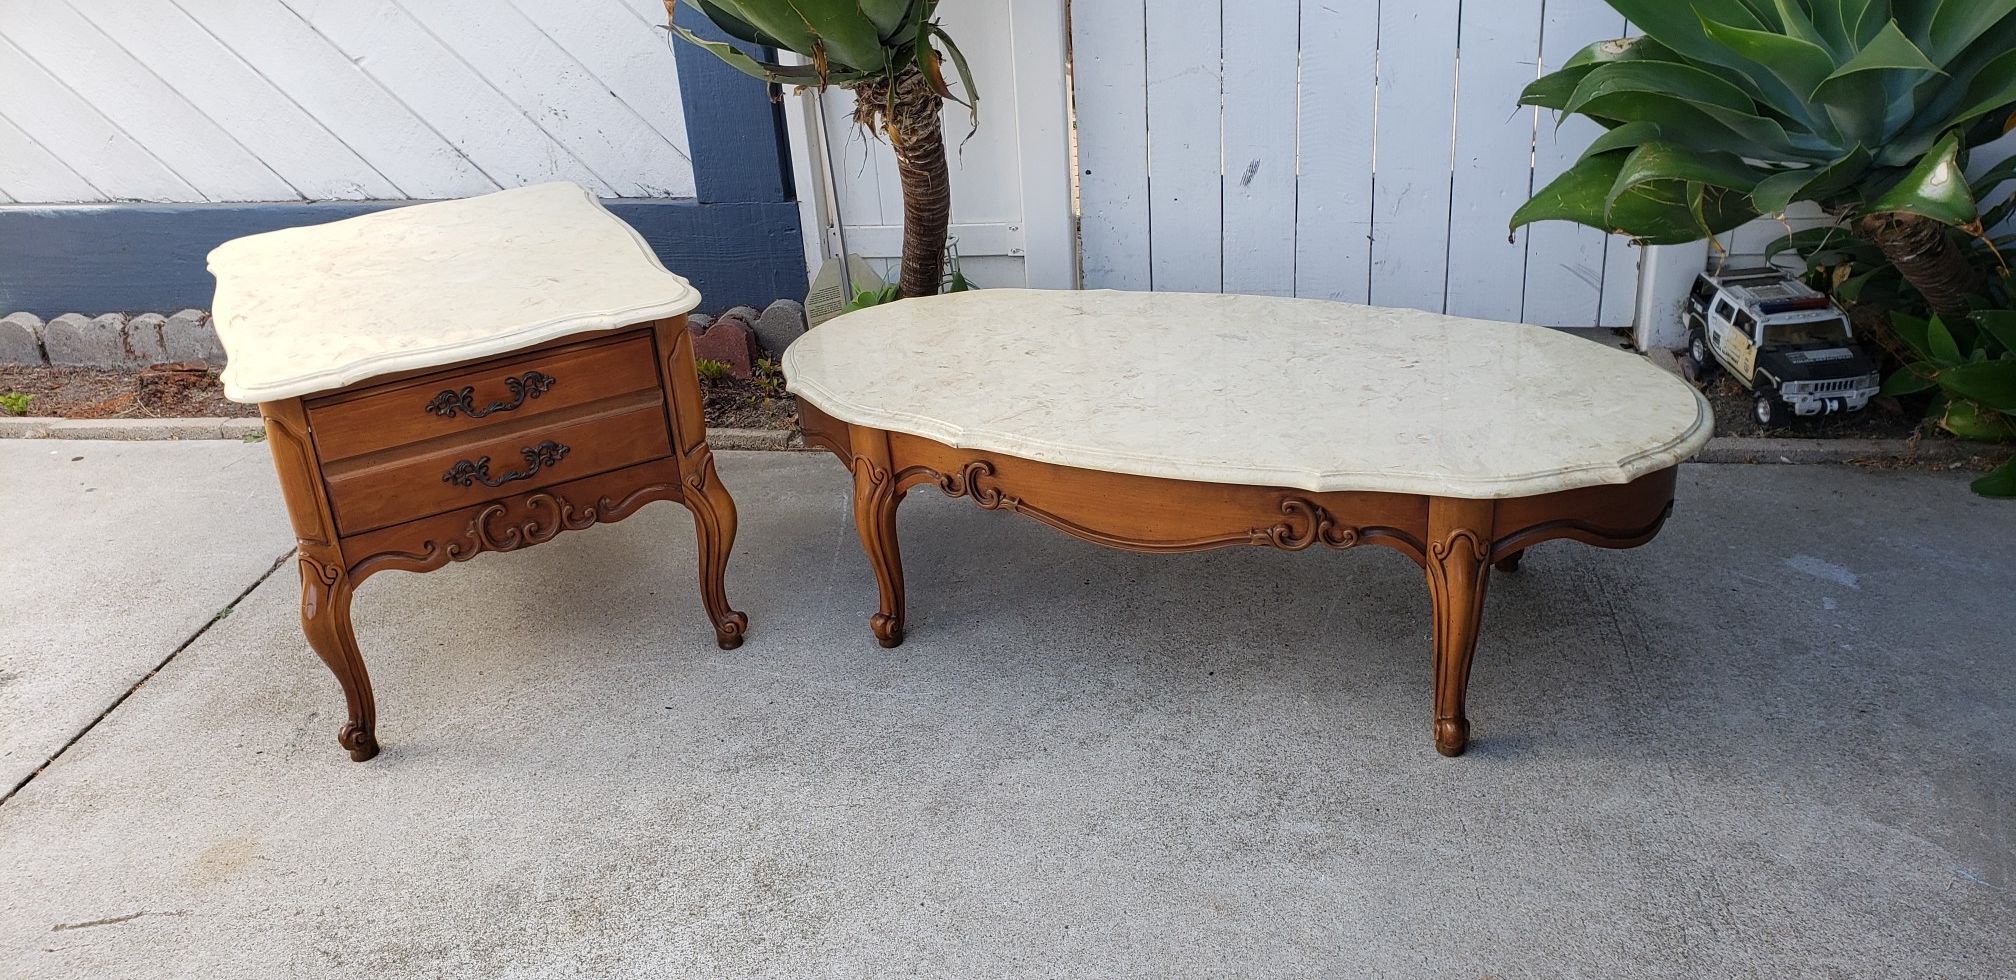 Marble top wood Coffee table end side table combo. Both pieces for 1 price. Nice used condition. Tops remove for easy transport